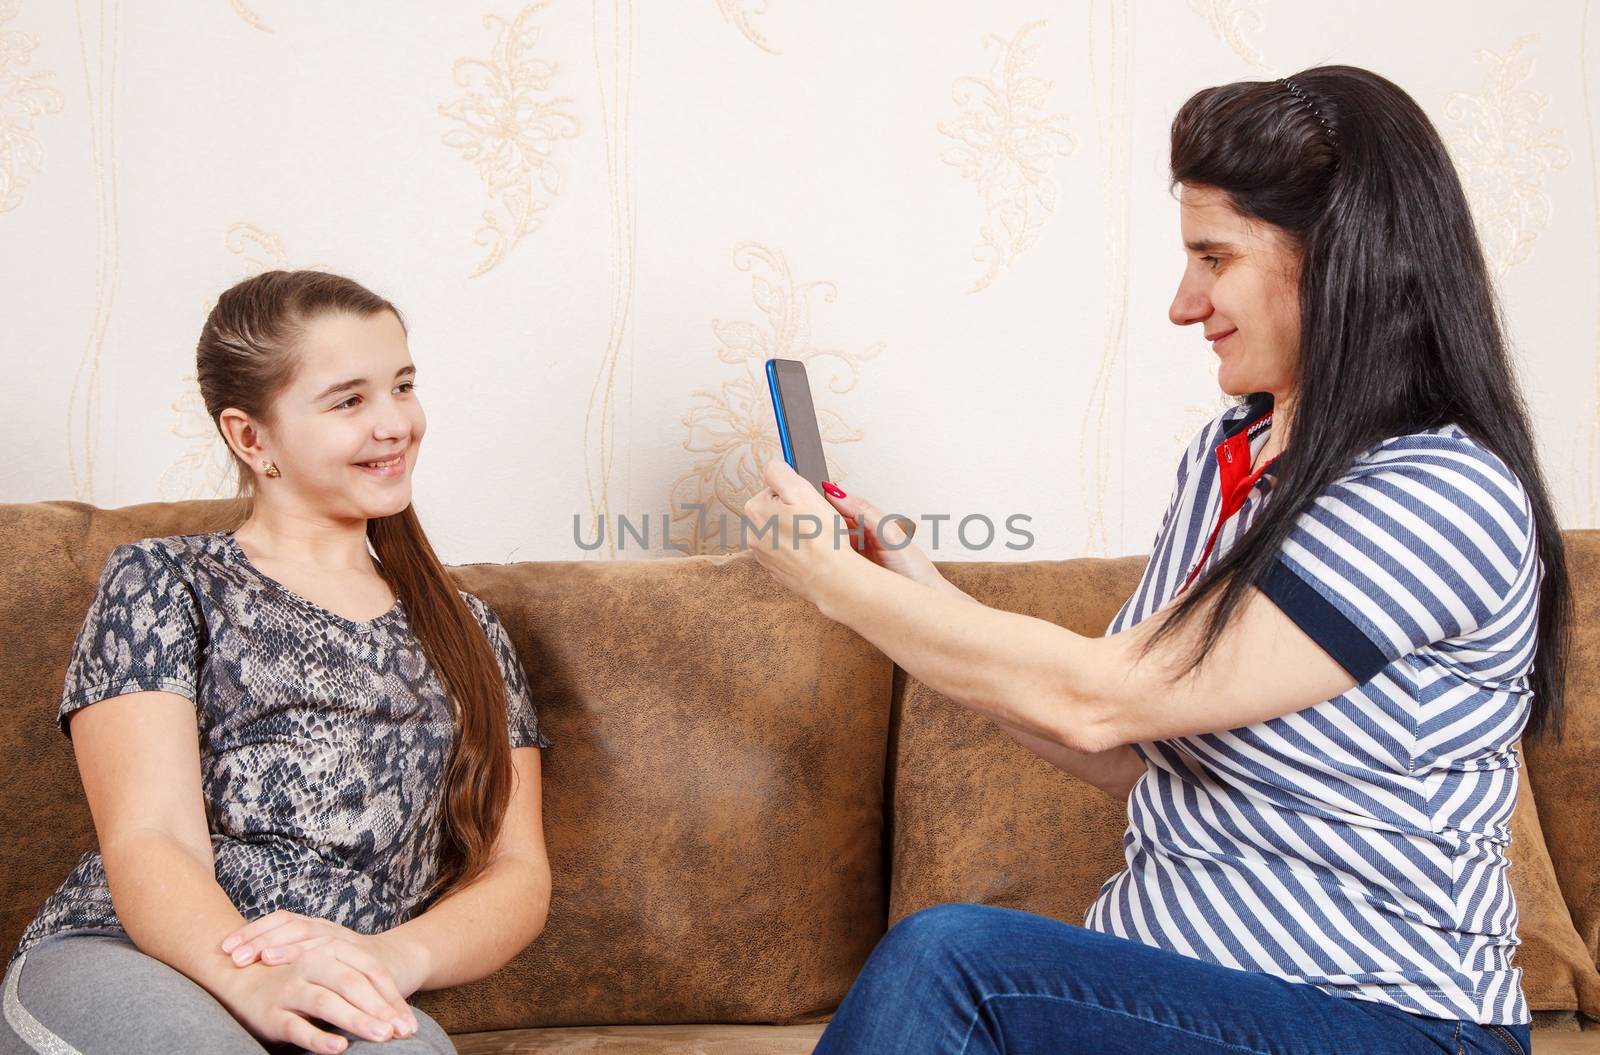 mom photographs daughter with a smartphone by raddnatt